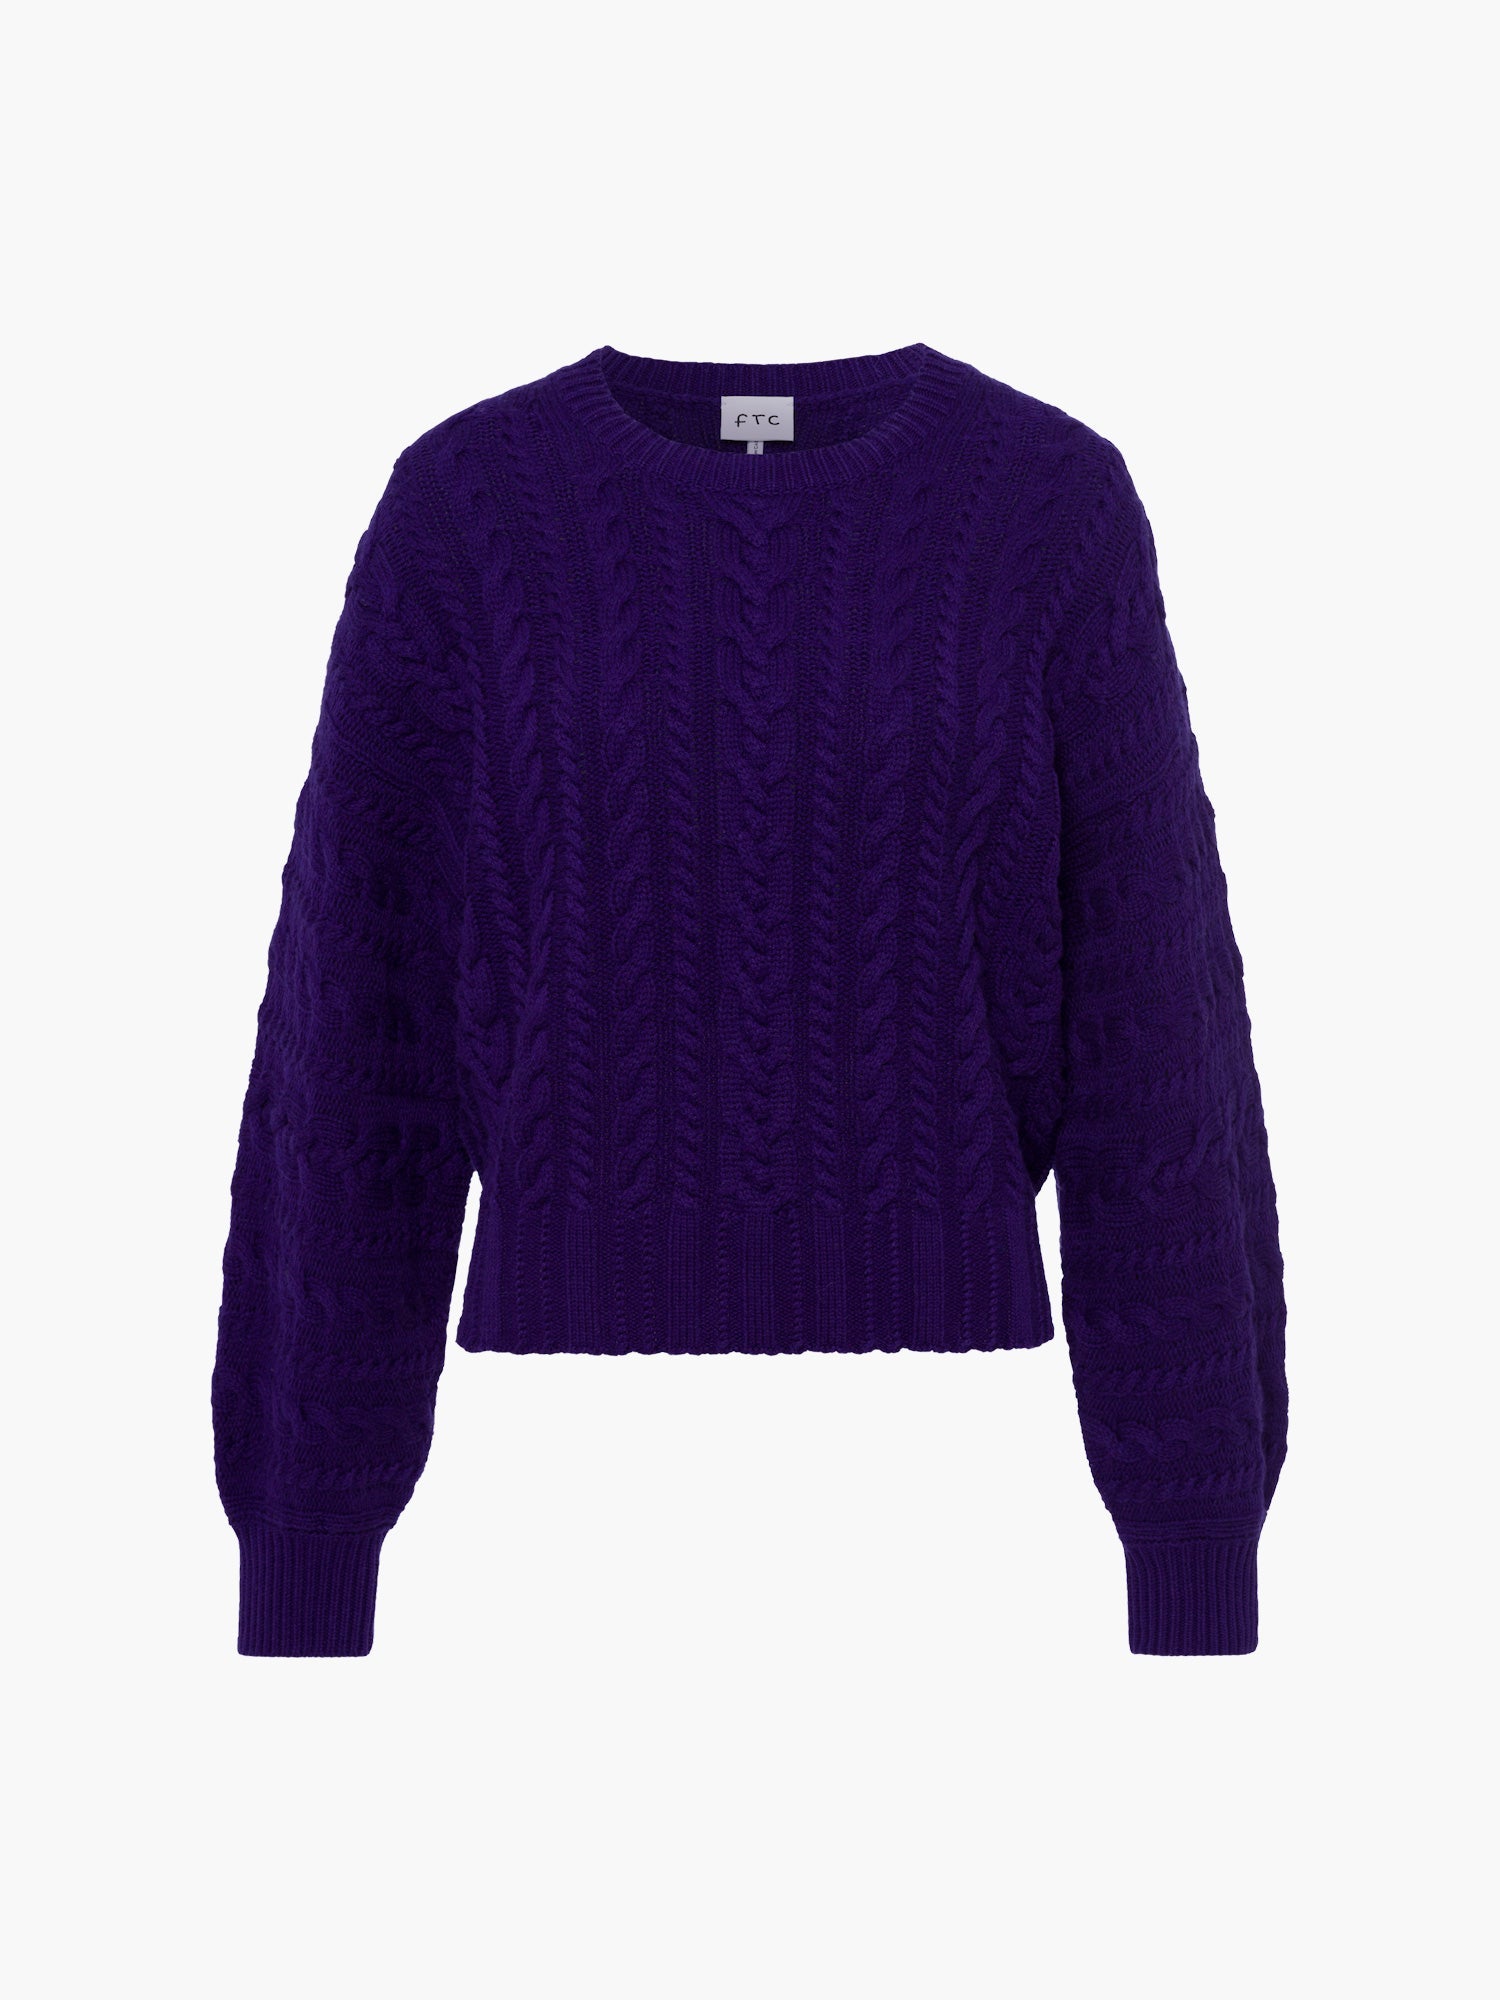 FTC-Cashmere-OUTLET-SALE-Pullover-RN-Strick-ARCHIVE-COLLECTION_783990fc-ffc4-4b44-990a-c3f0c7061efe.jpg